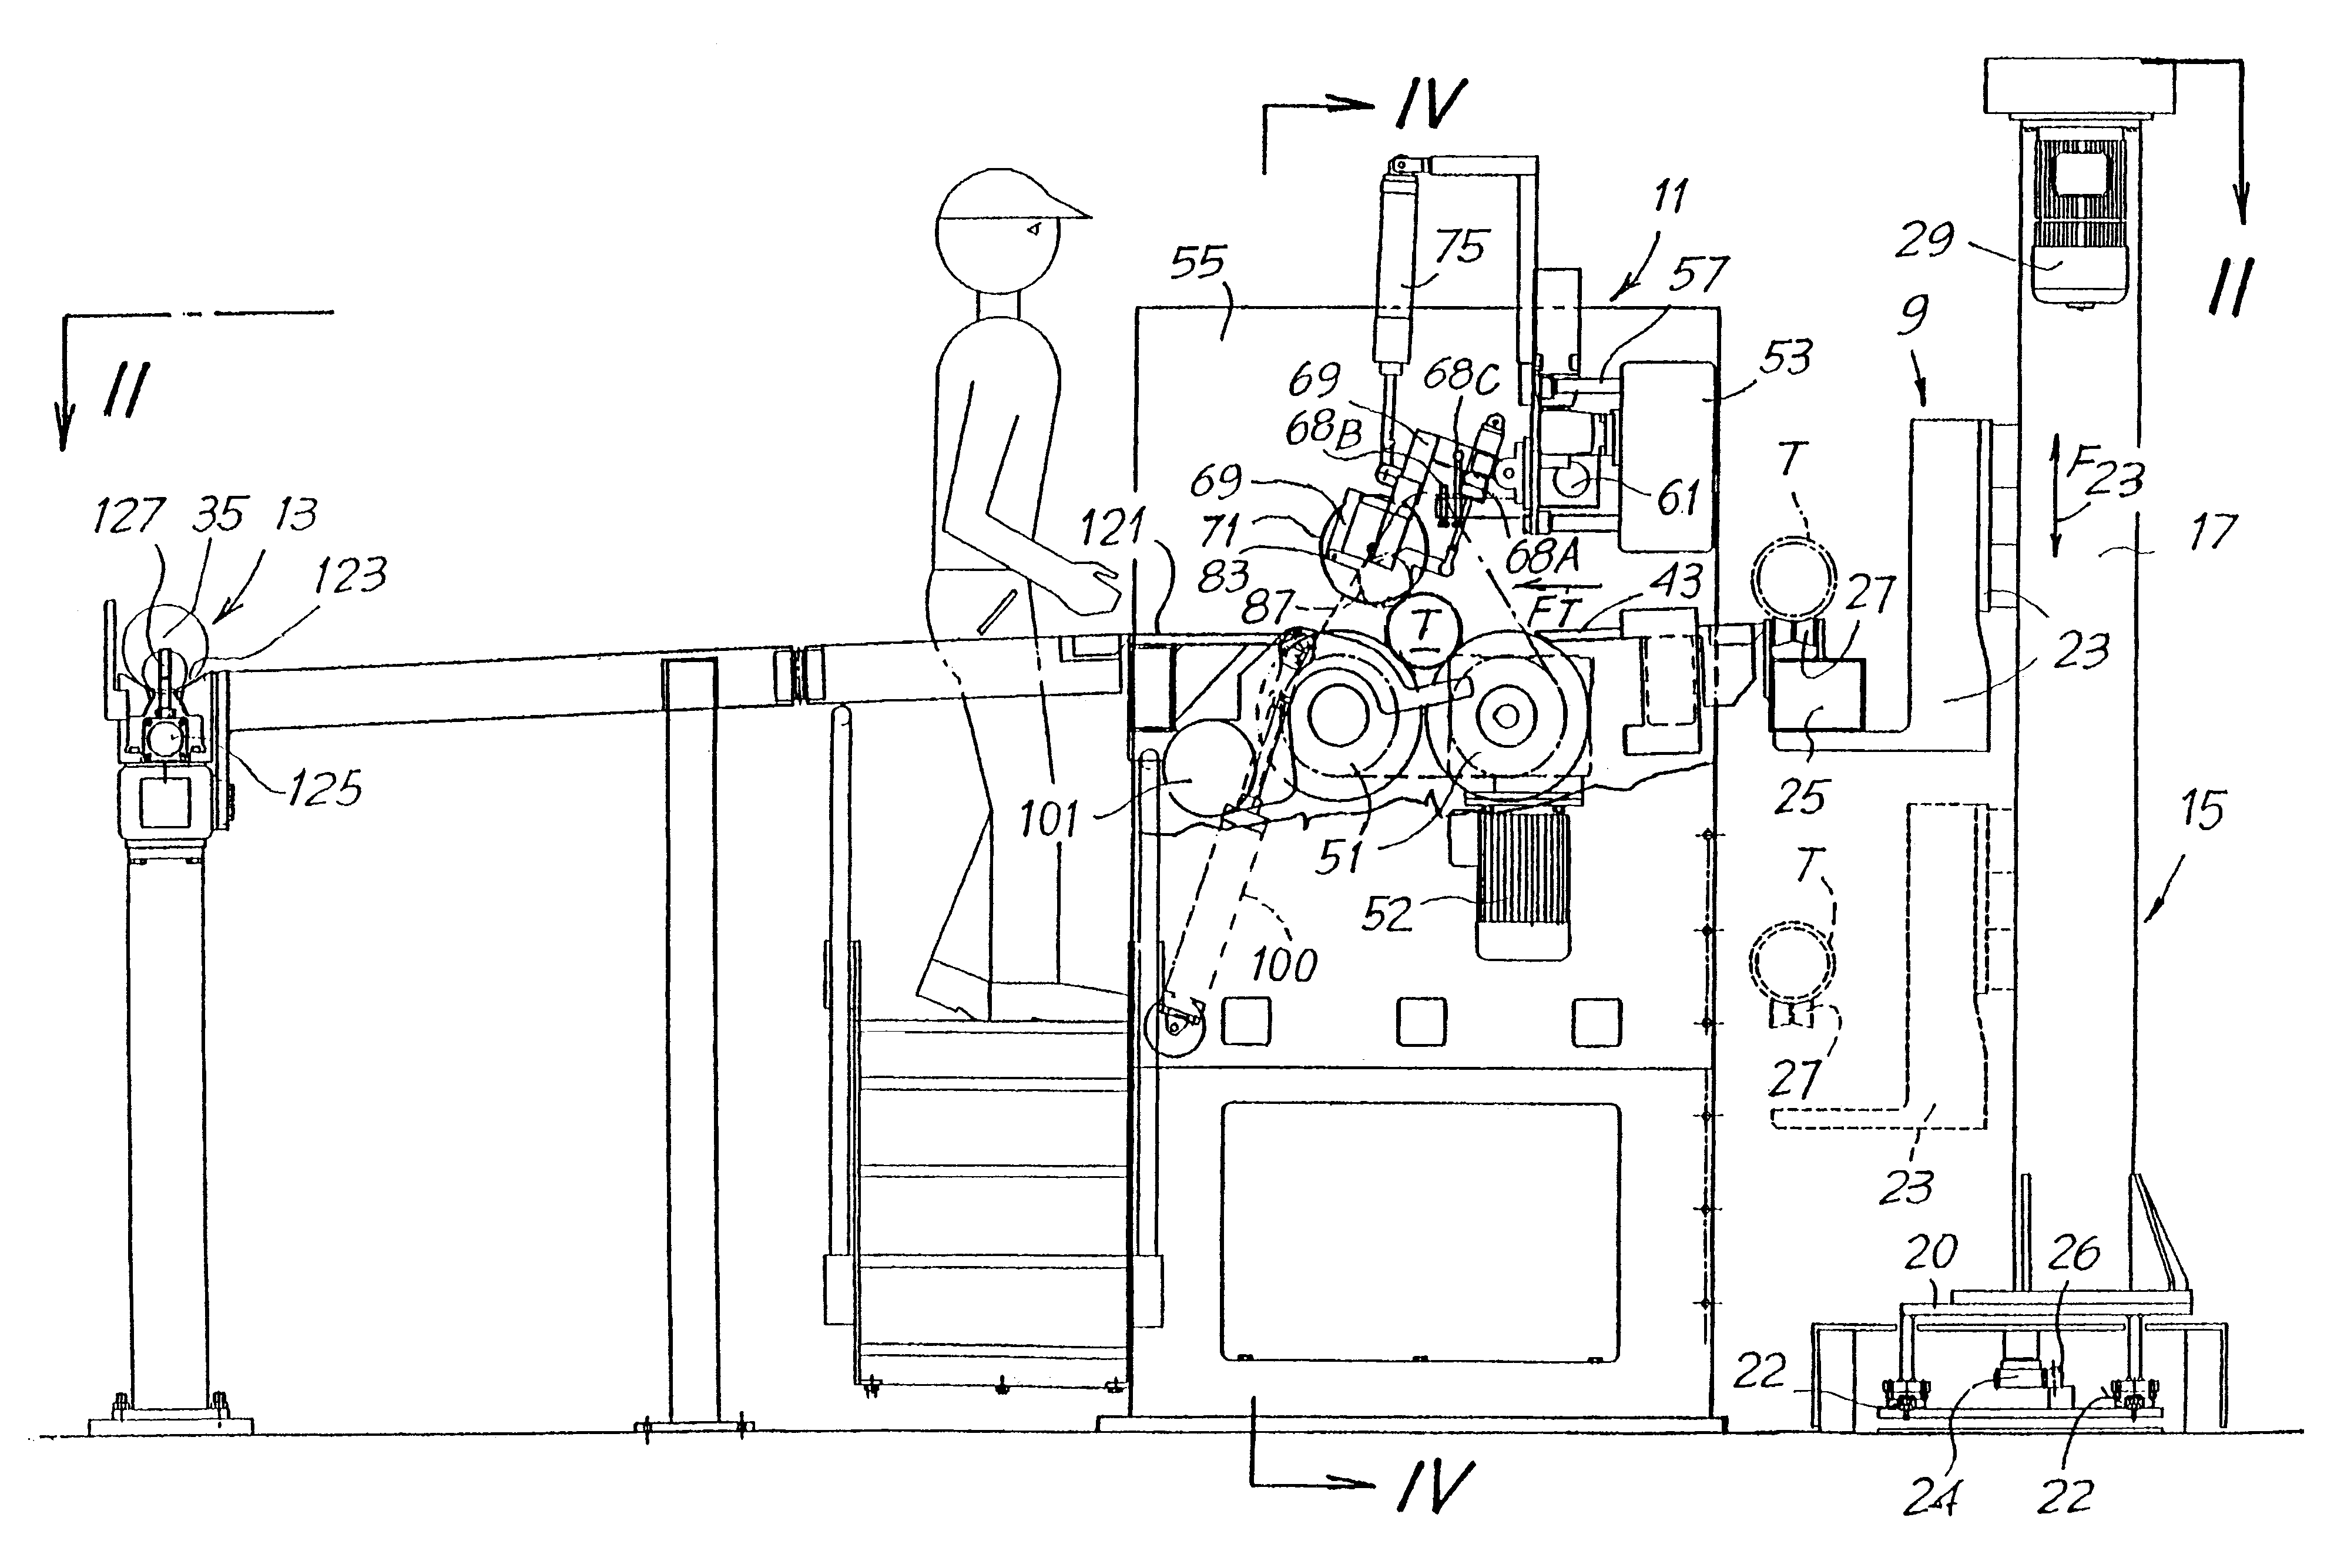 Apparatus and method for preparing winding mandrels and cores for rewinding machines